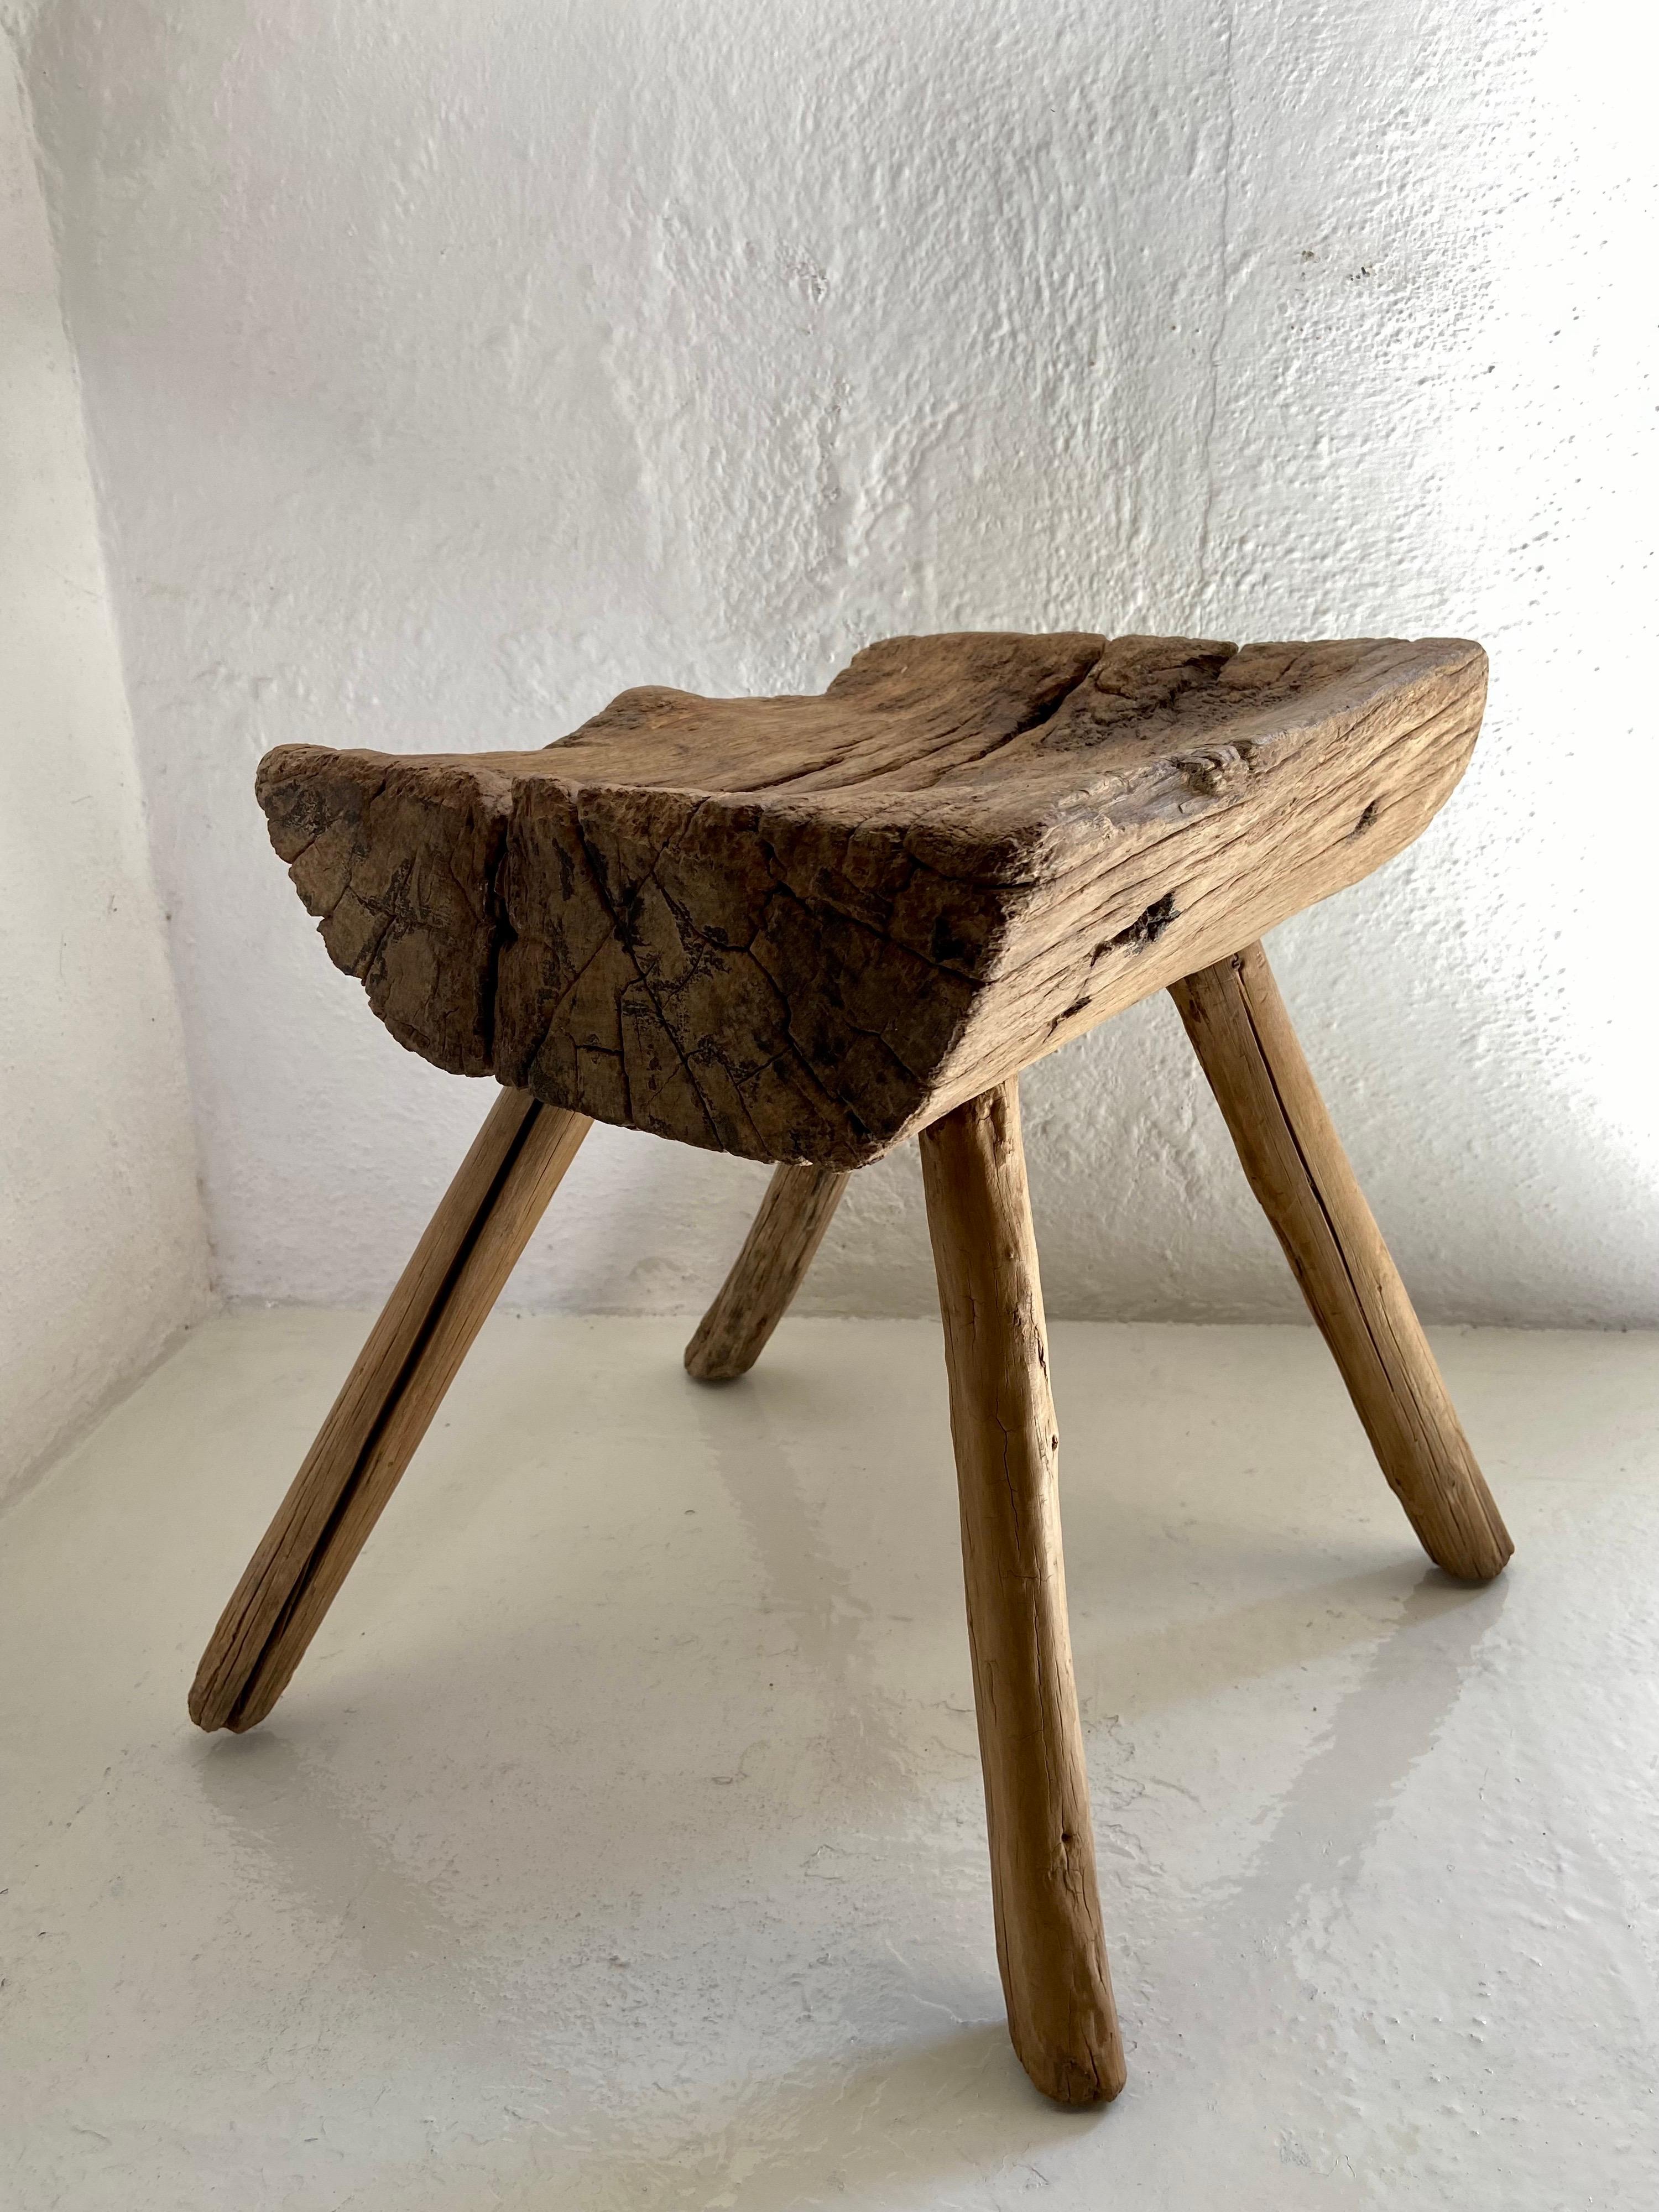 Late 20th Century Primitive Stool from Mexico, circa 1970's